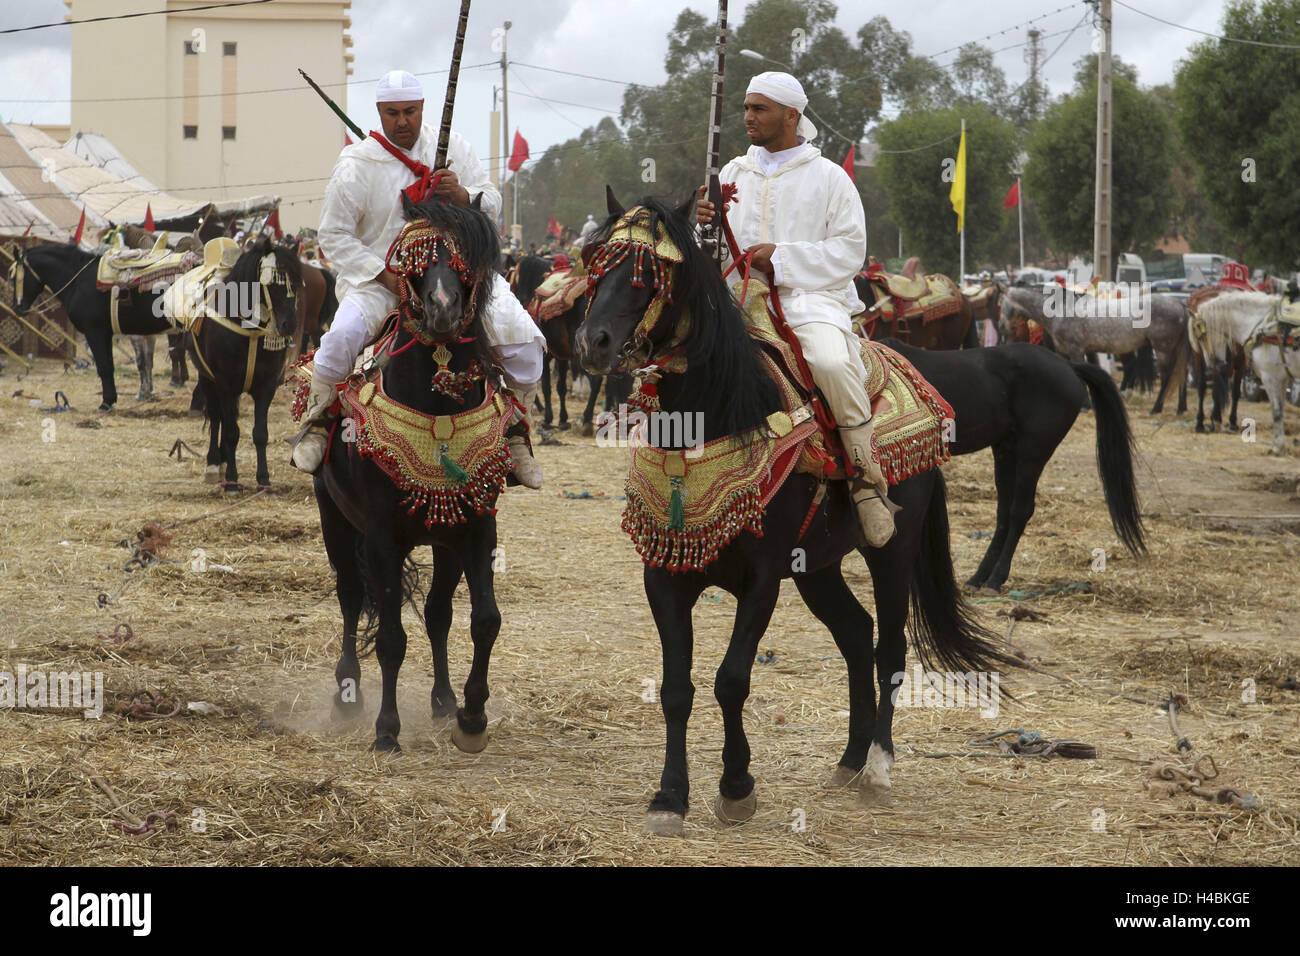 Africa, Morocco, Meknes, Rommani, horses with riders at a Fantasia, Stock Photo